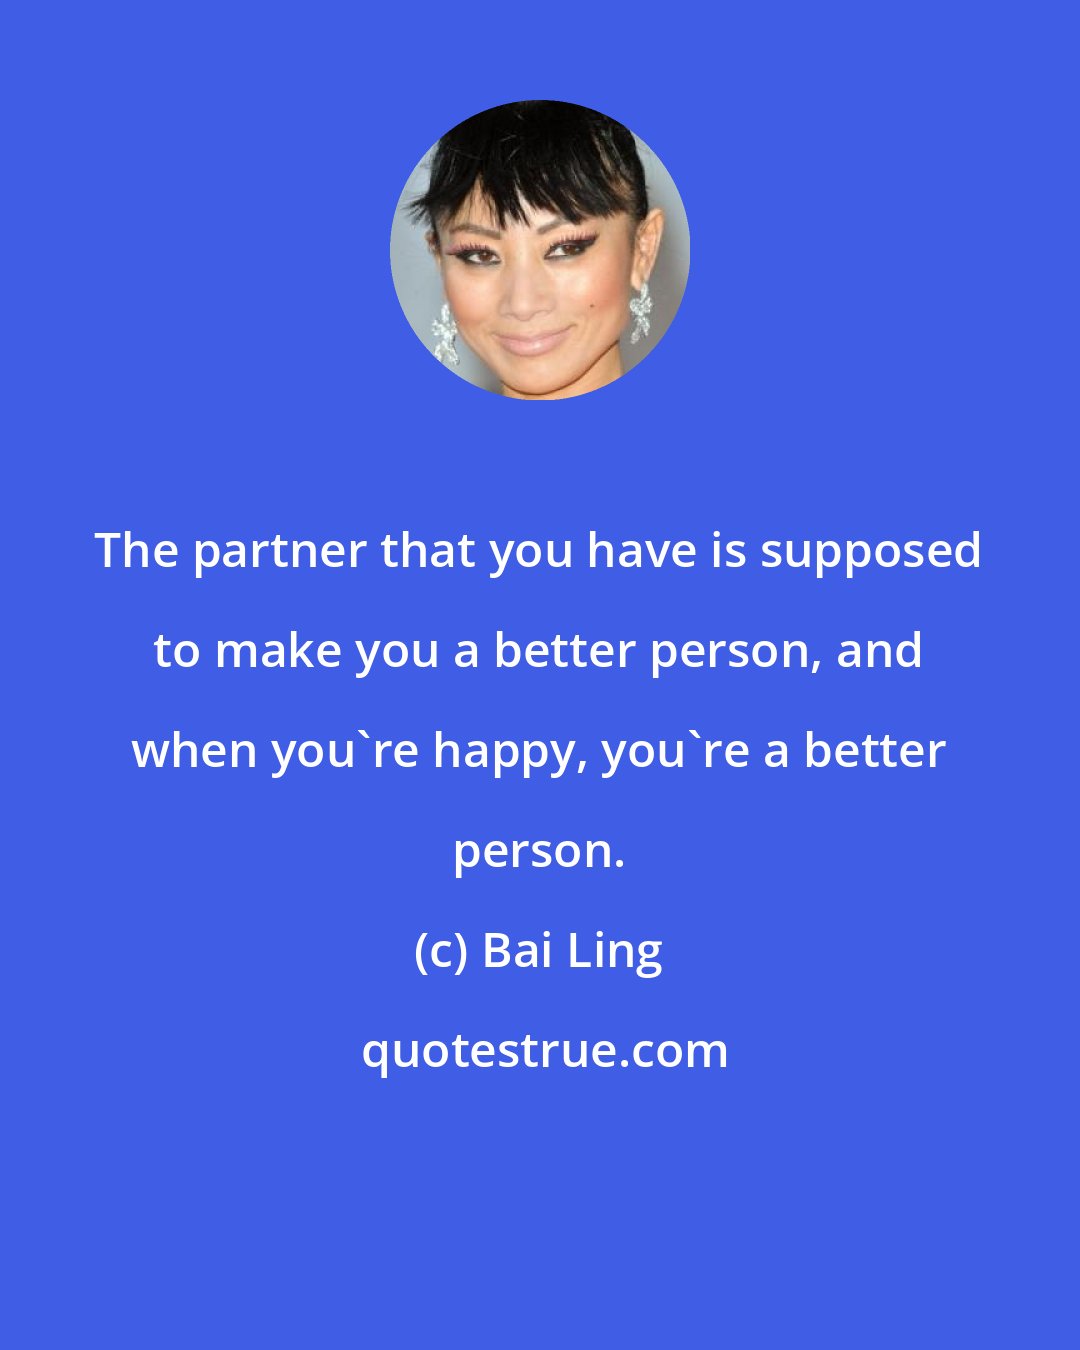 Bai Ling: The partner that you have is supposed to make you a better person, and when you're happy, you're a better person.